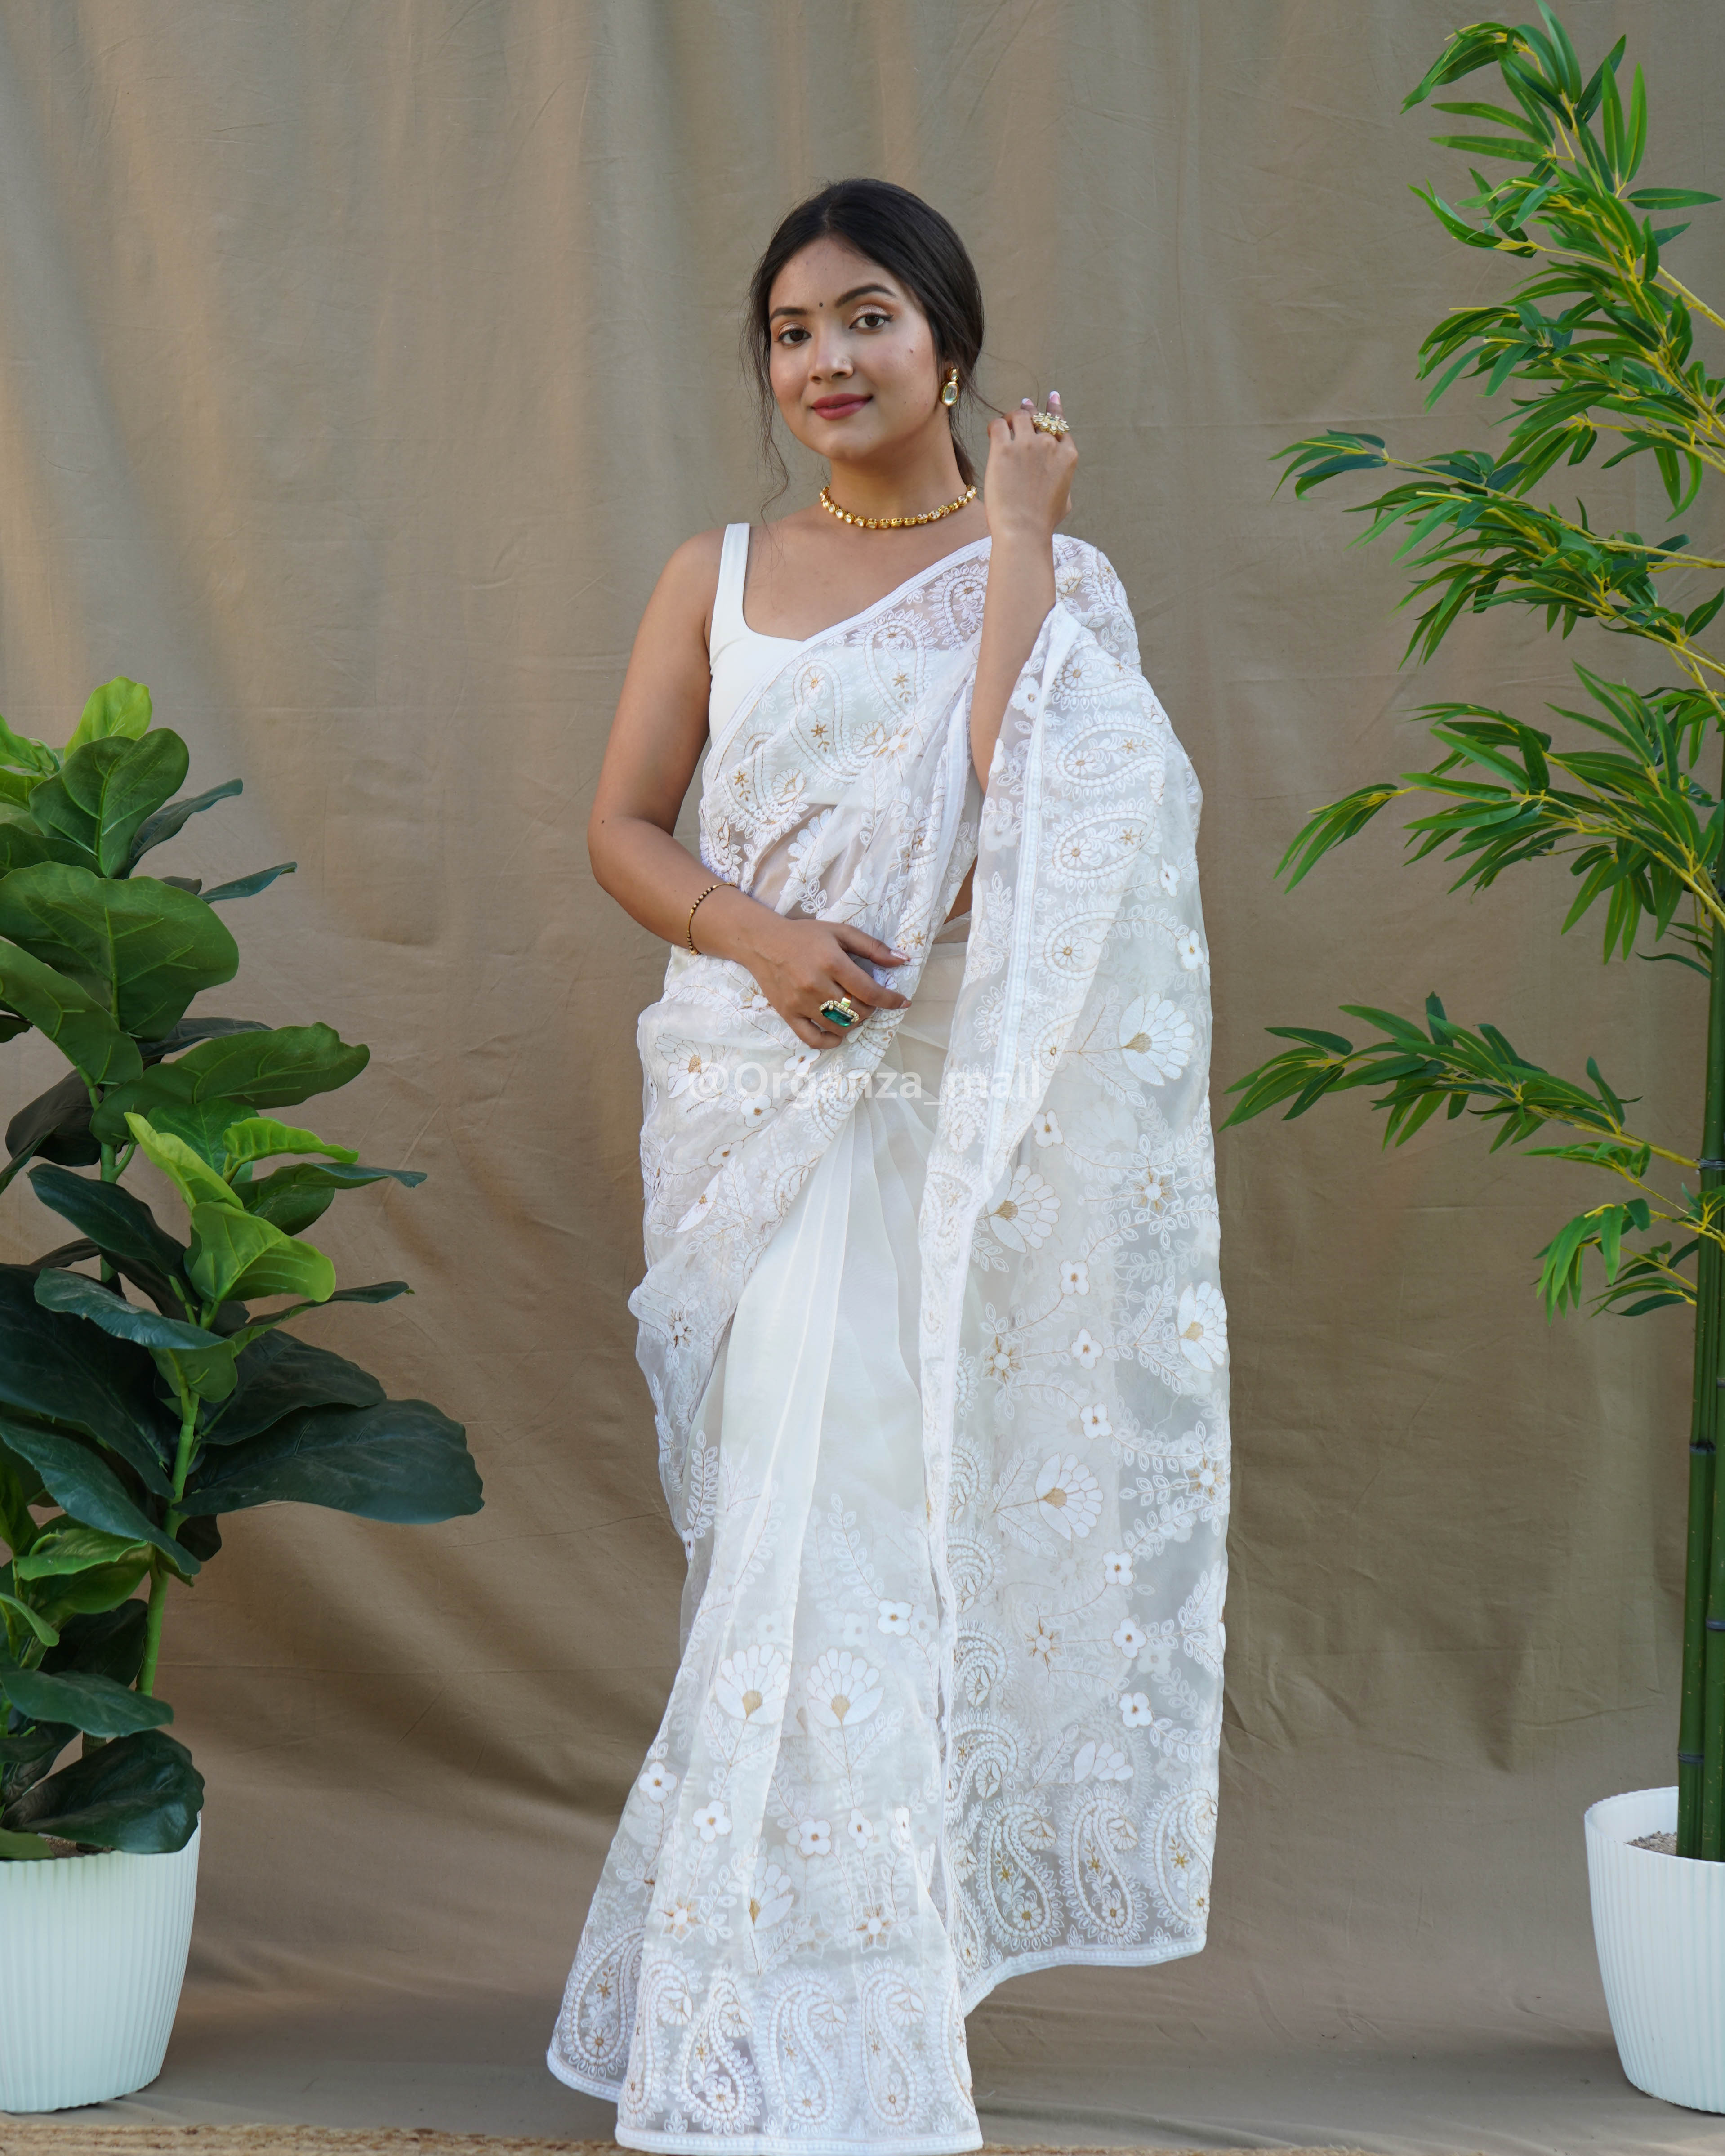 30 different ways on how to style a chikankari saree - Baggout